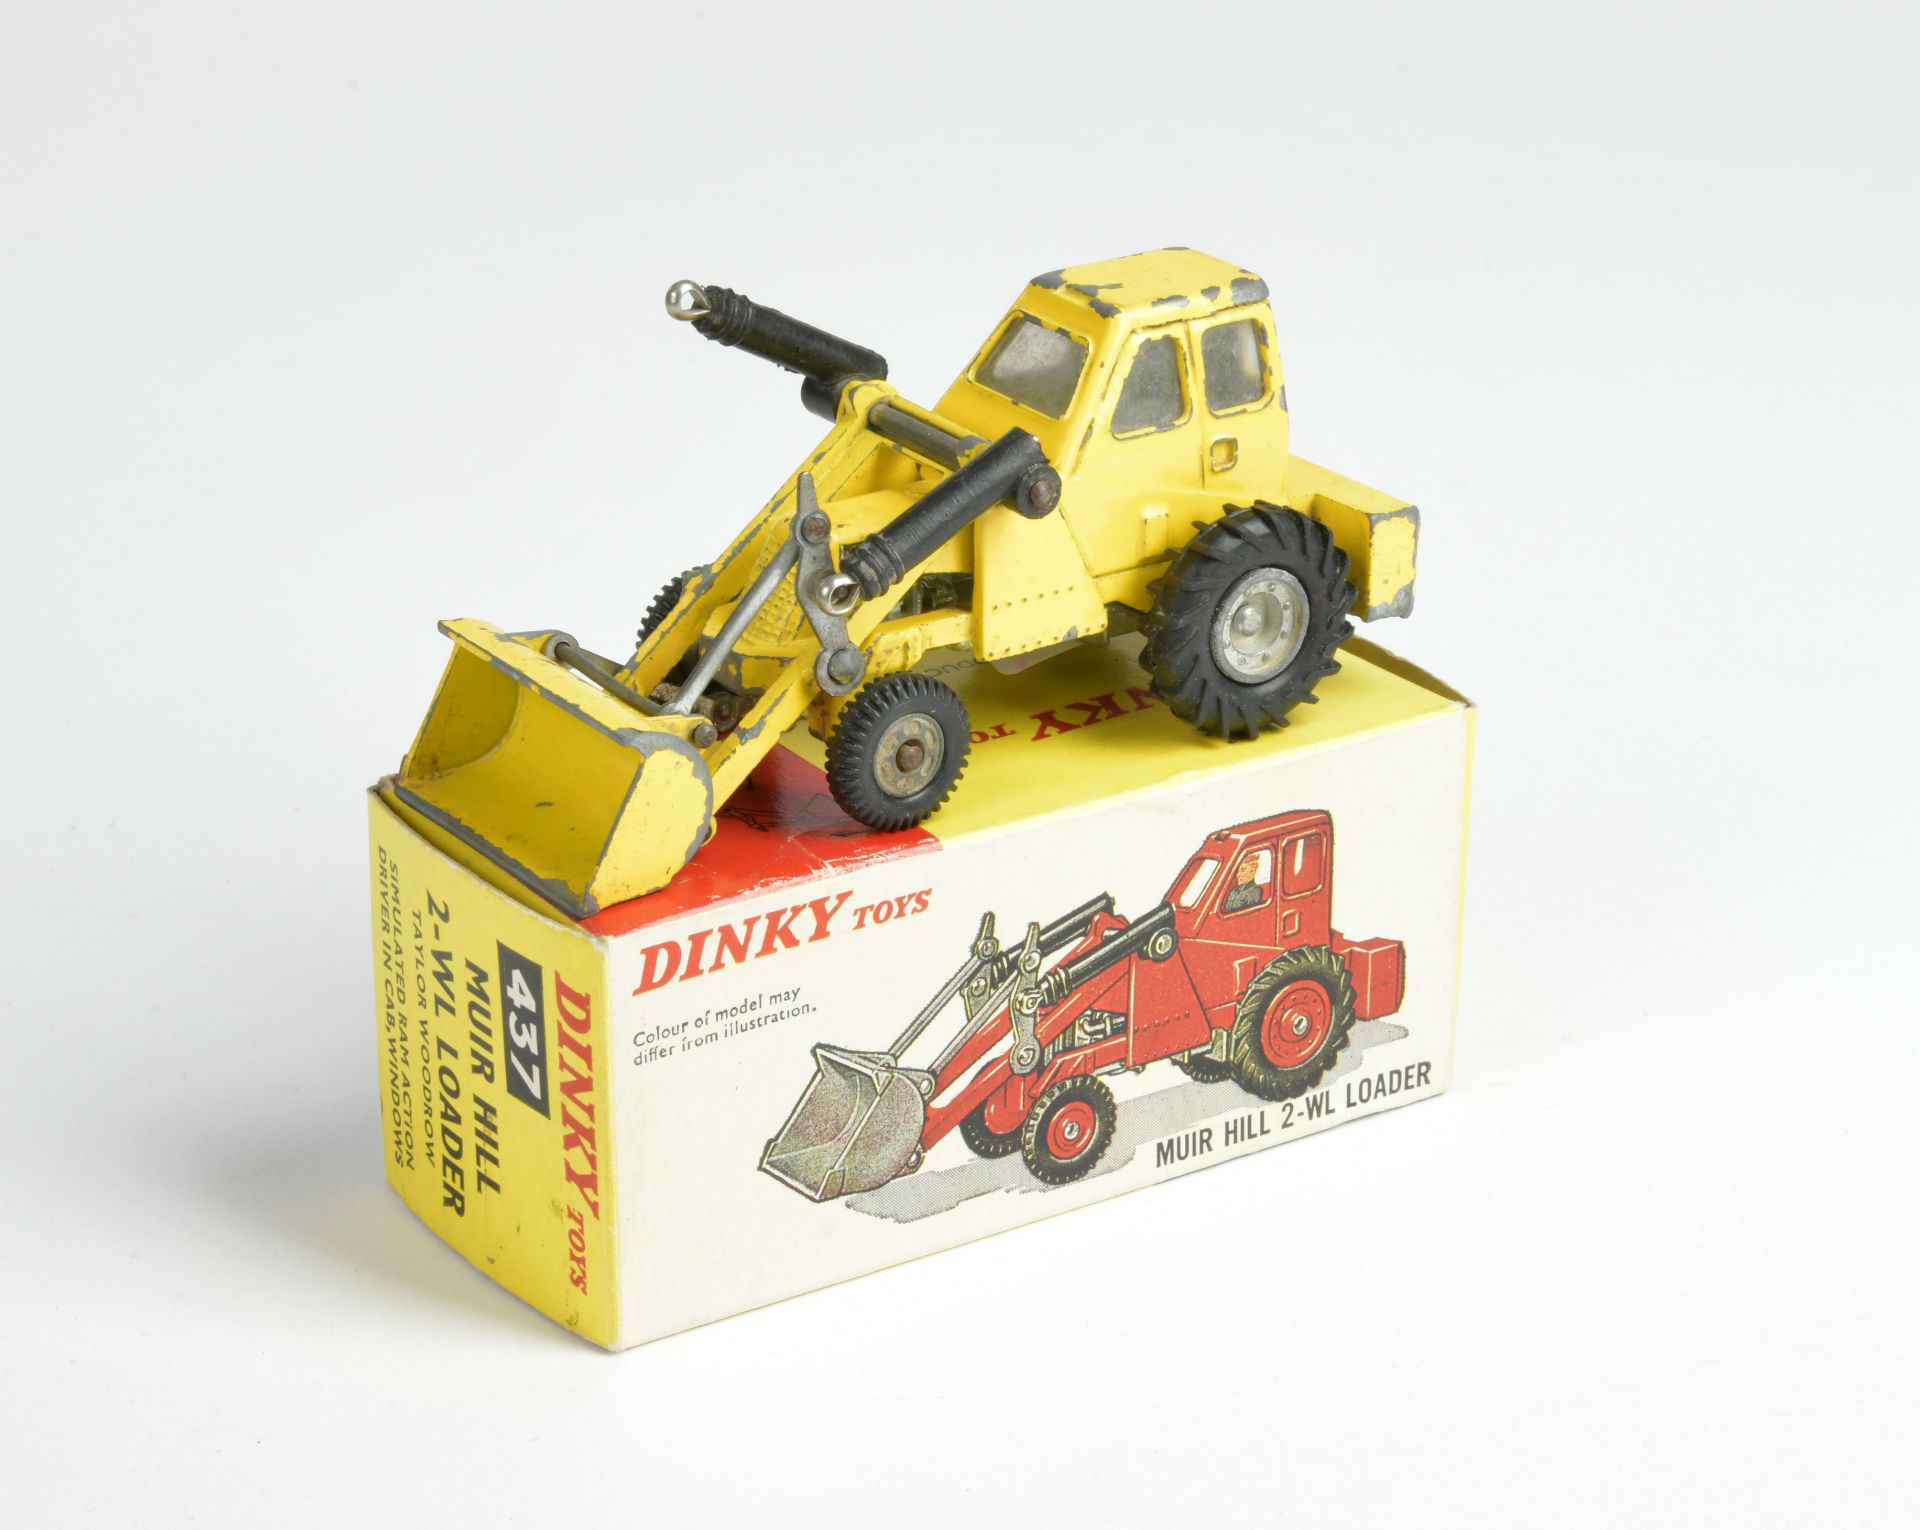 Dinky Toys, 437 Muir Hill 2-WL Loader, England, 1:43, diecast, paint d., box C 1-, C 2-